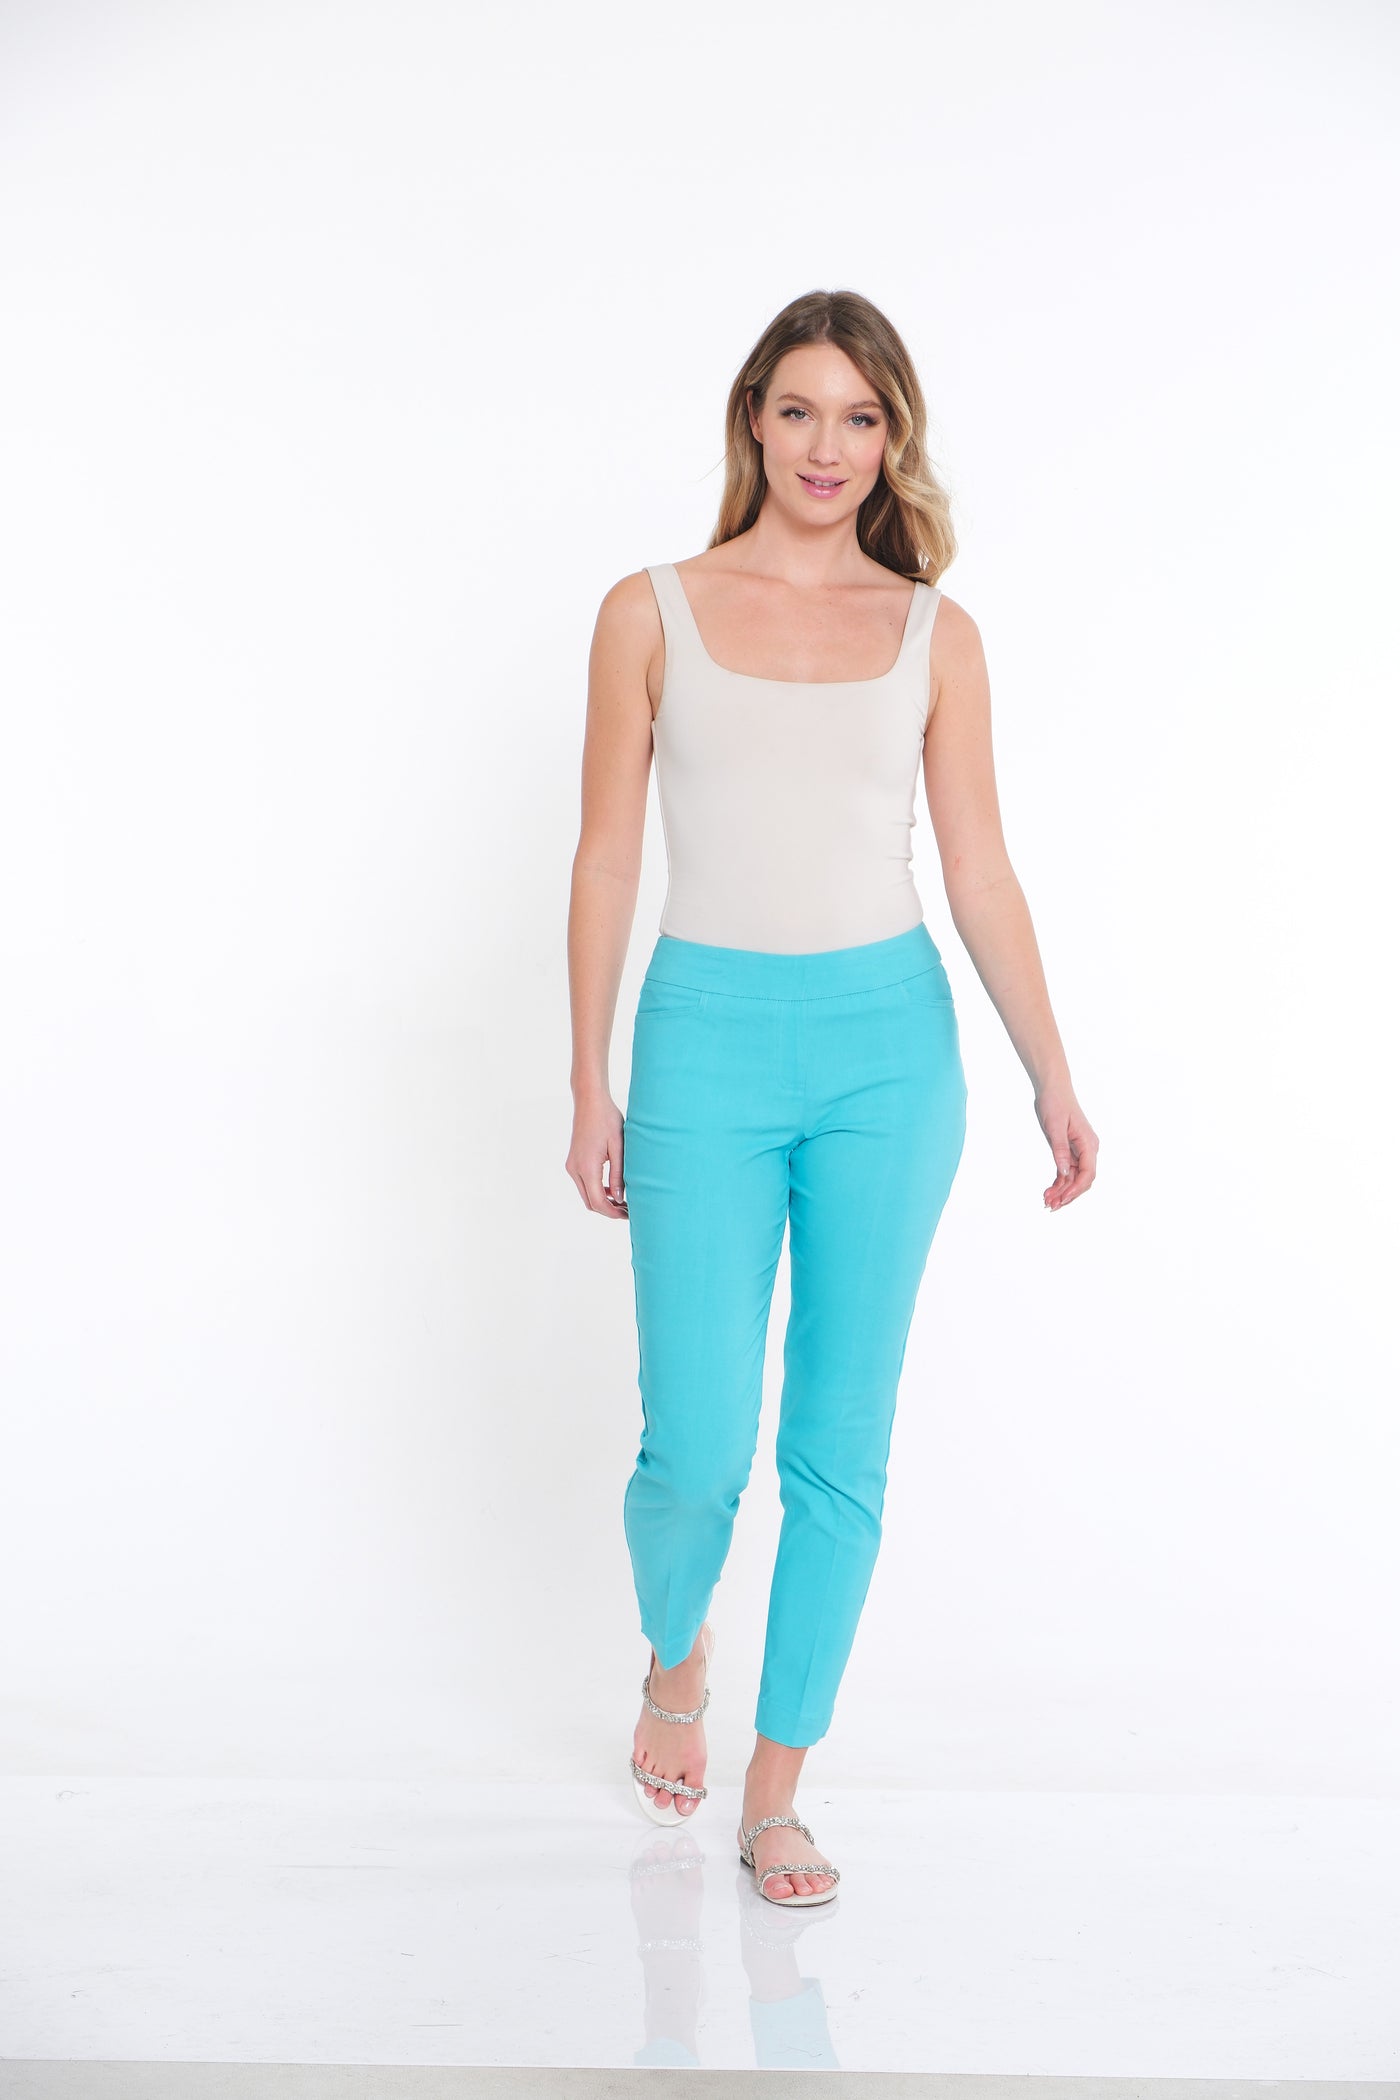 PULL-ON ANKLE PANT WITH REAL FRONT AND BACK POCKETS - Blue Aqua